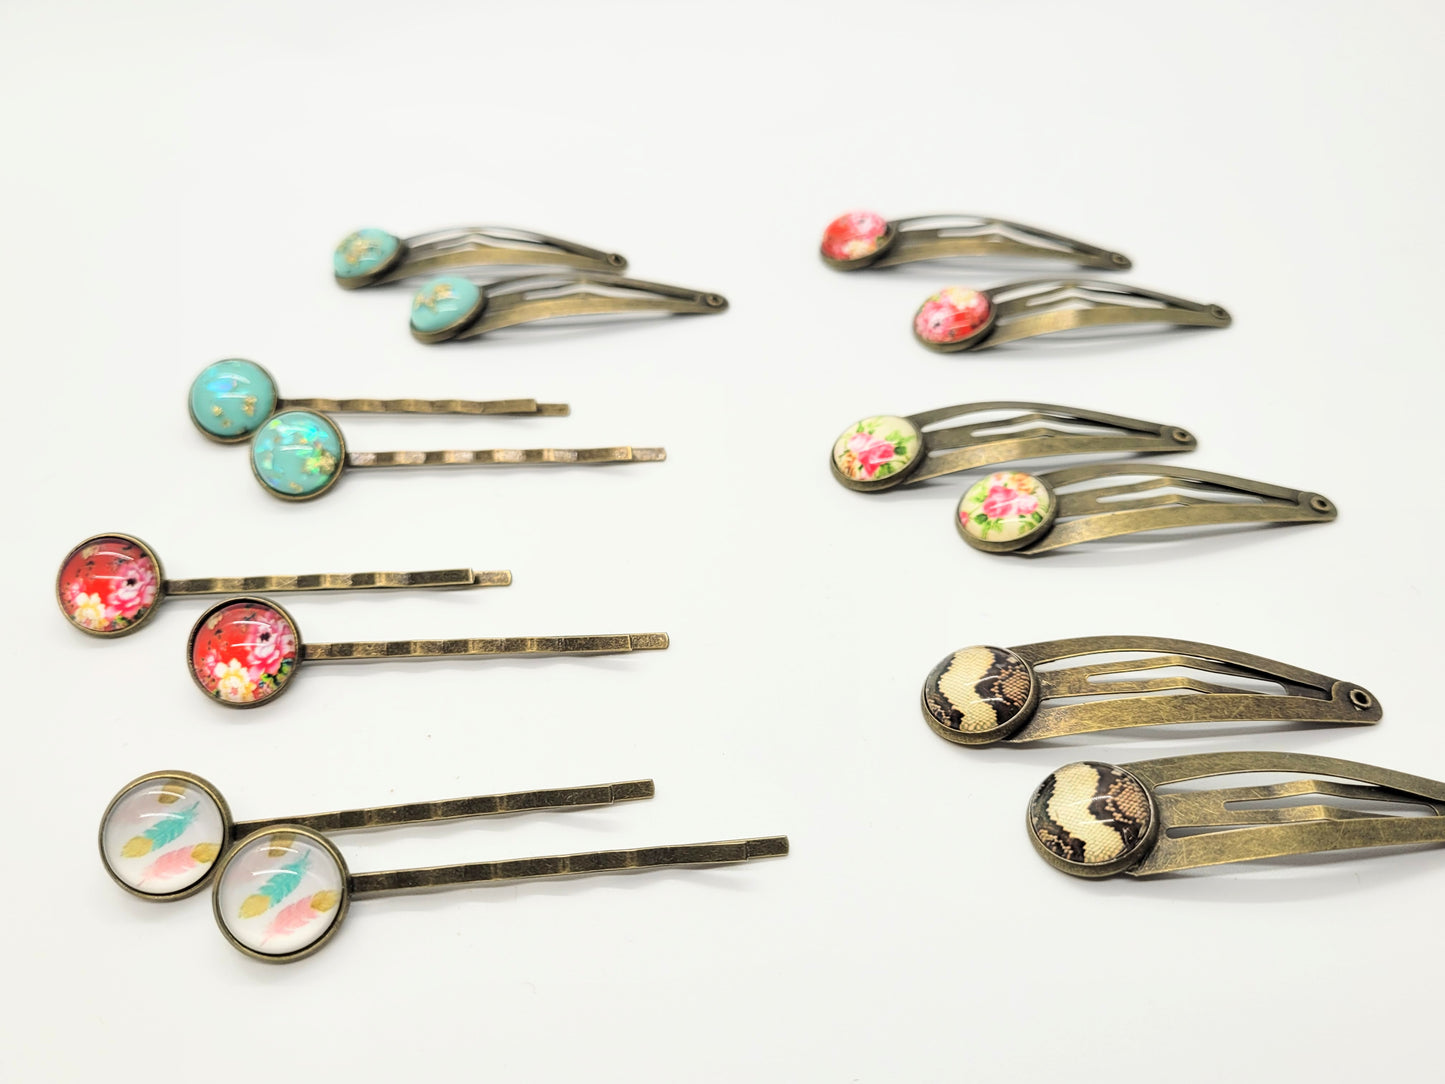 Various hairpins and barrettes, antique bronze